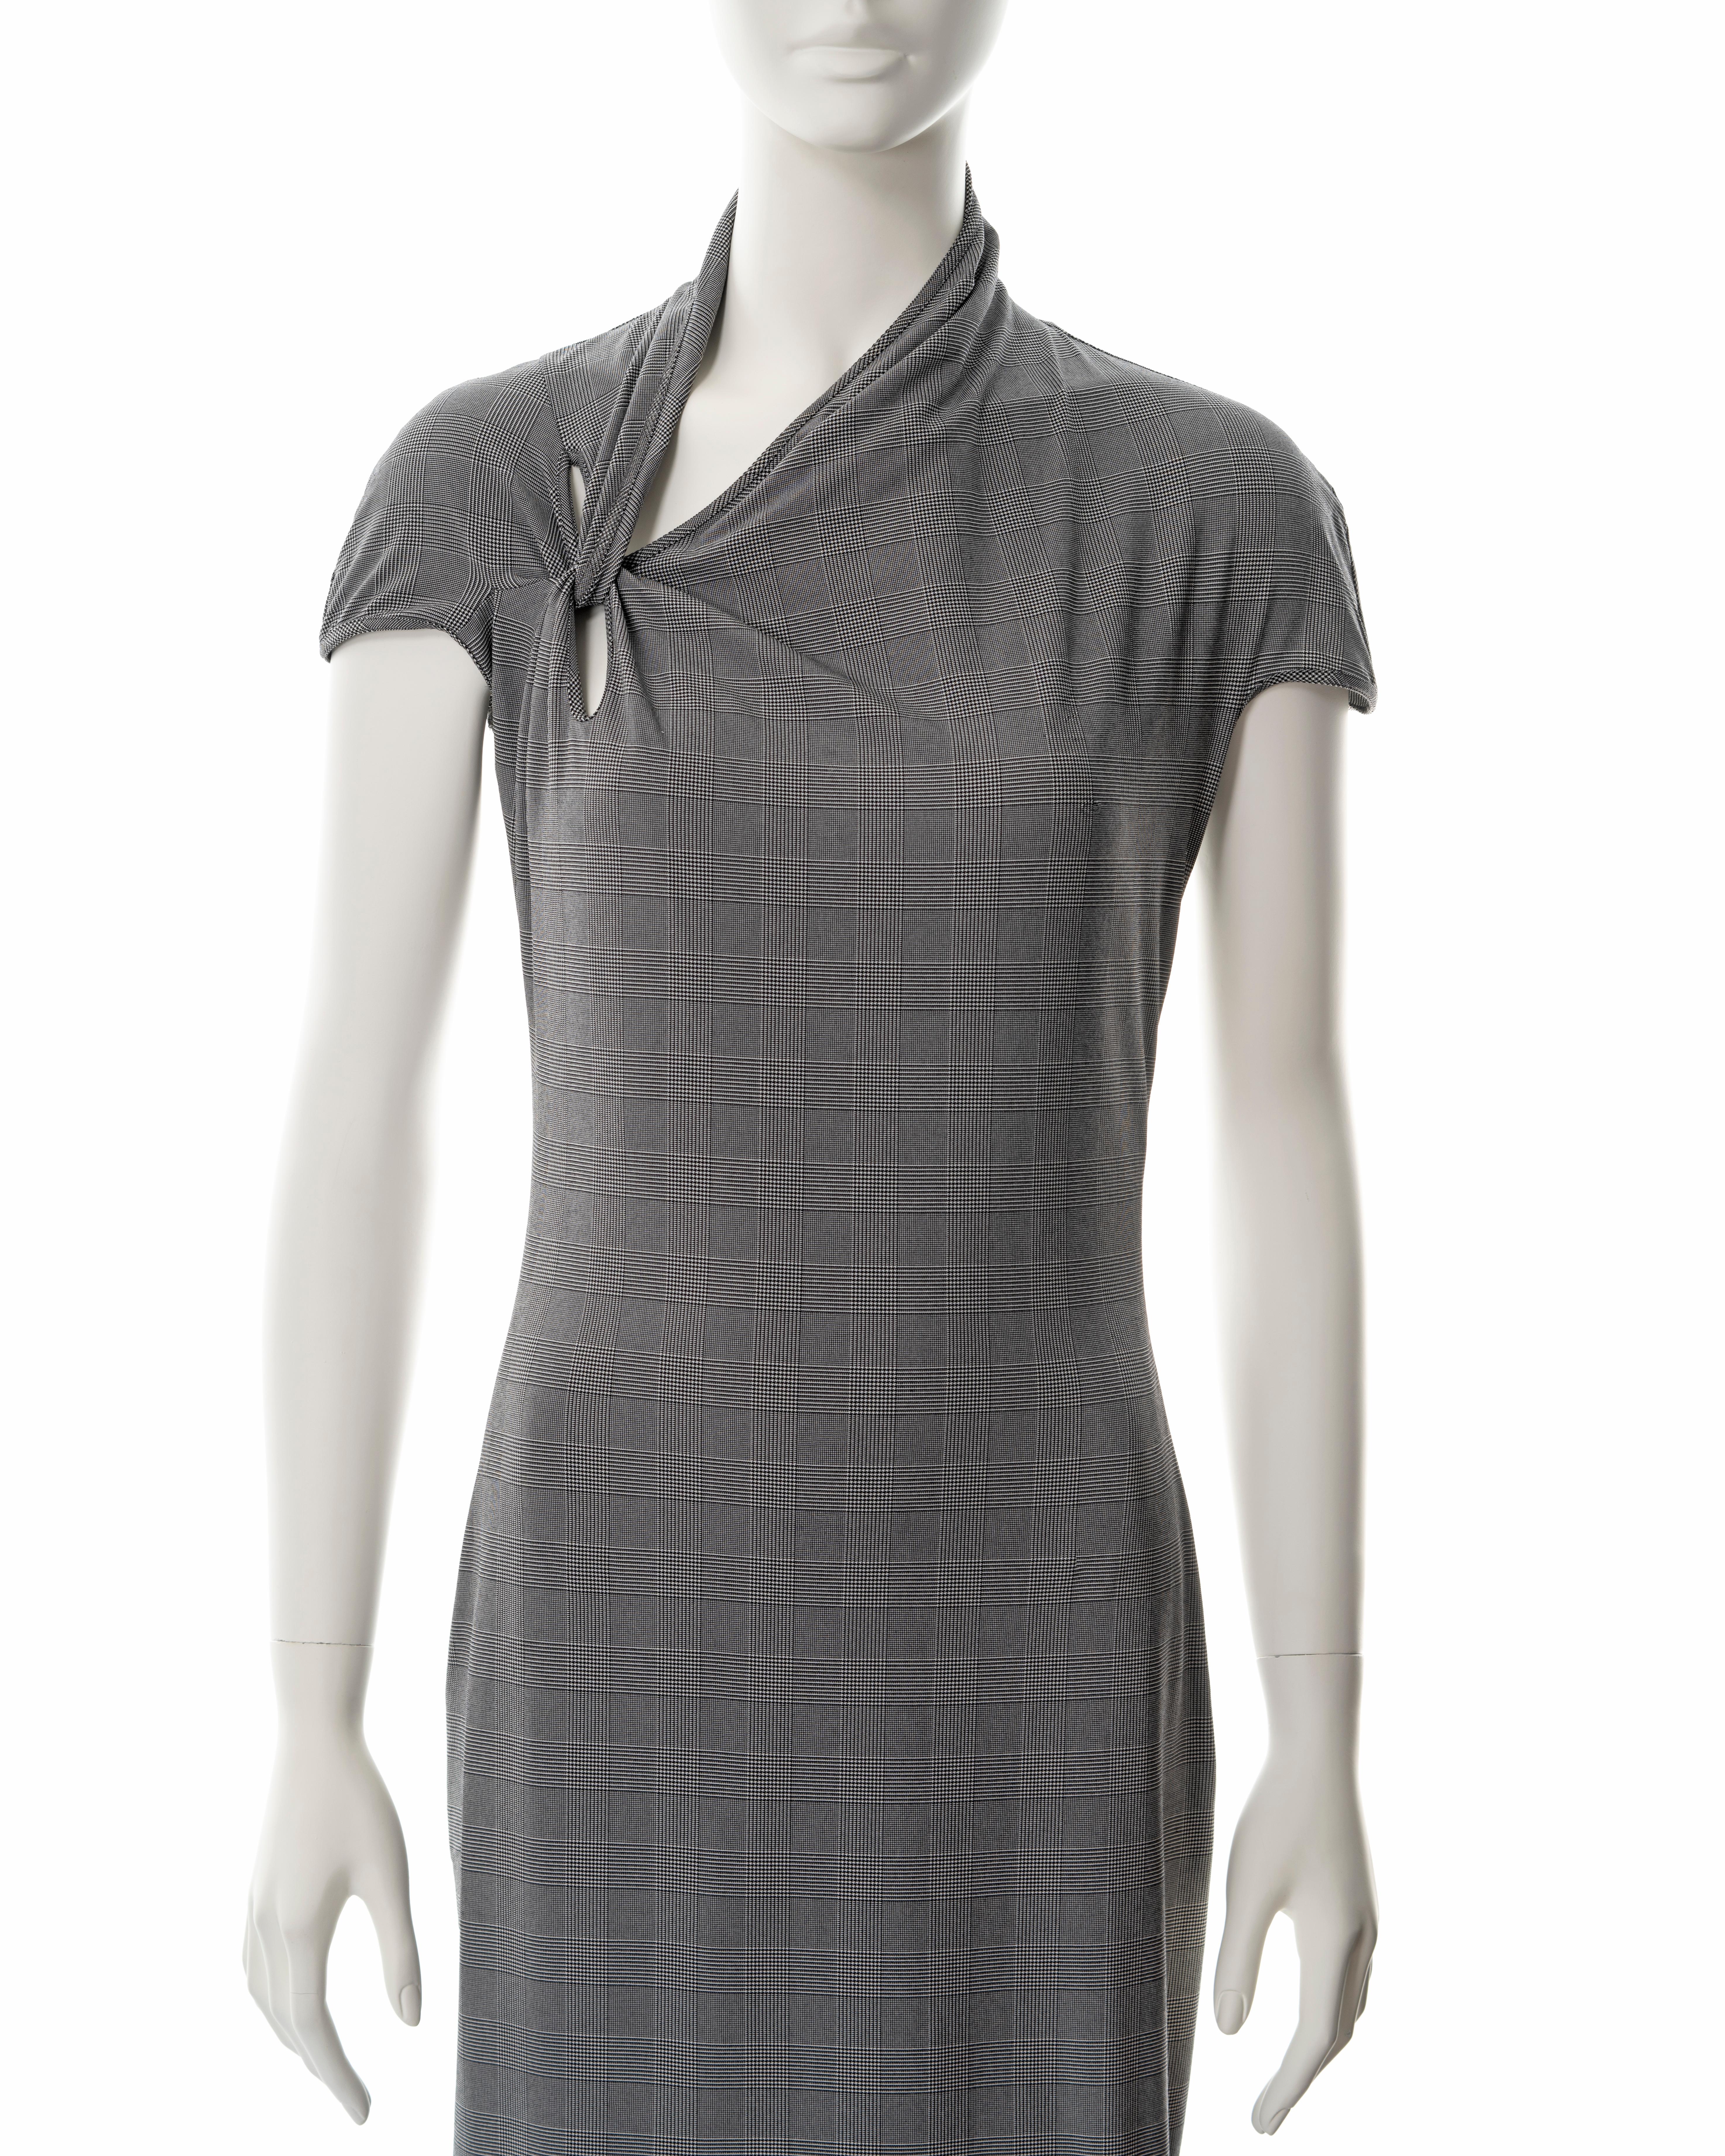 Christian Dior by John Galliano grey checked nylon sheath dress, ss 2000 In Good Condition For Sale In London, GB